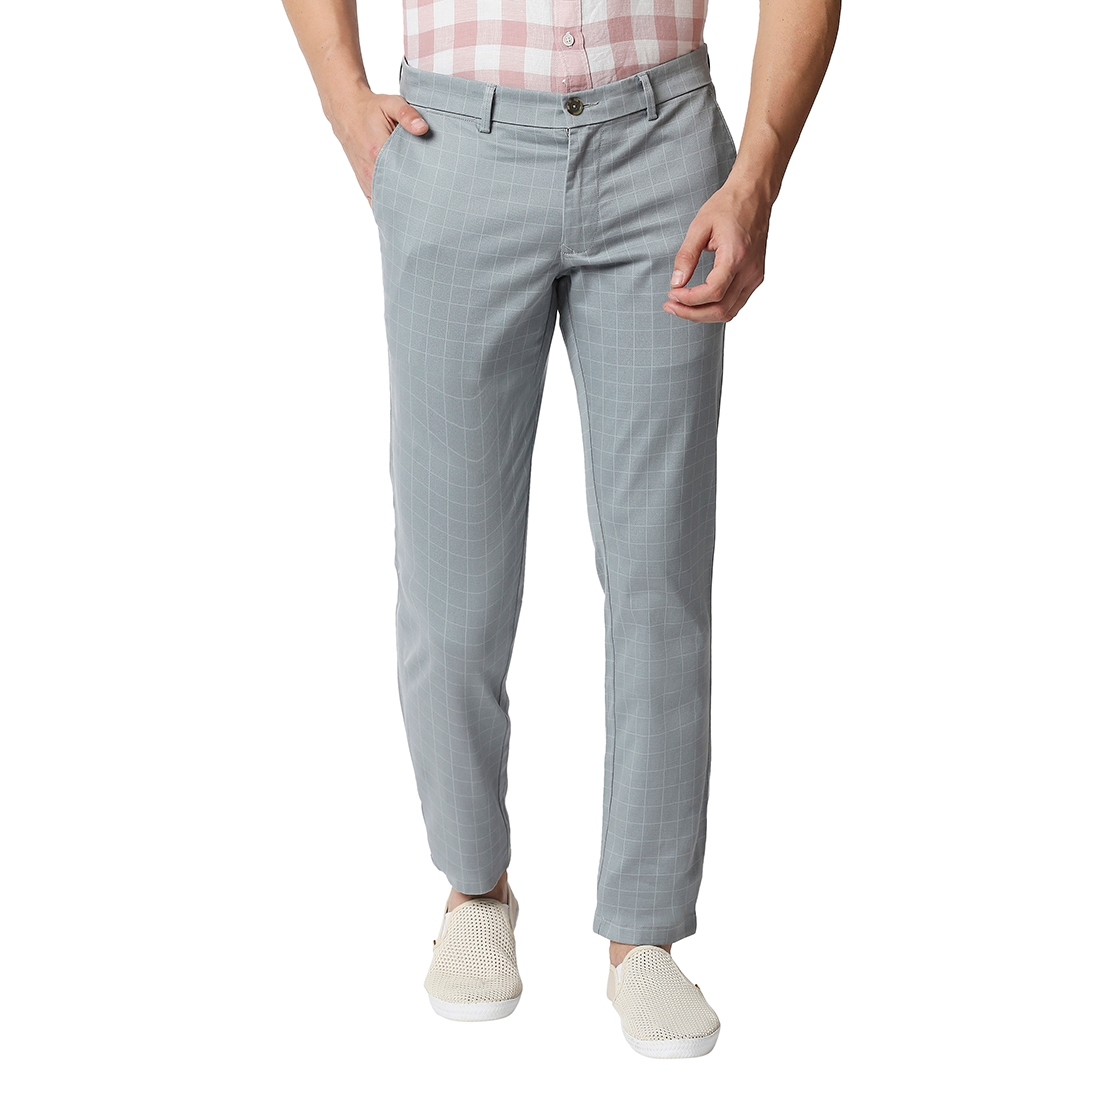 Basics | BASICS CASUAL PRINTED LIGHT BLUE COTTON STRETCH TAPERED TROUSERS 